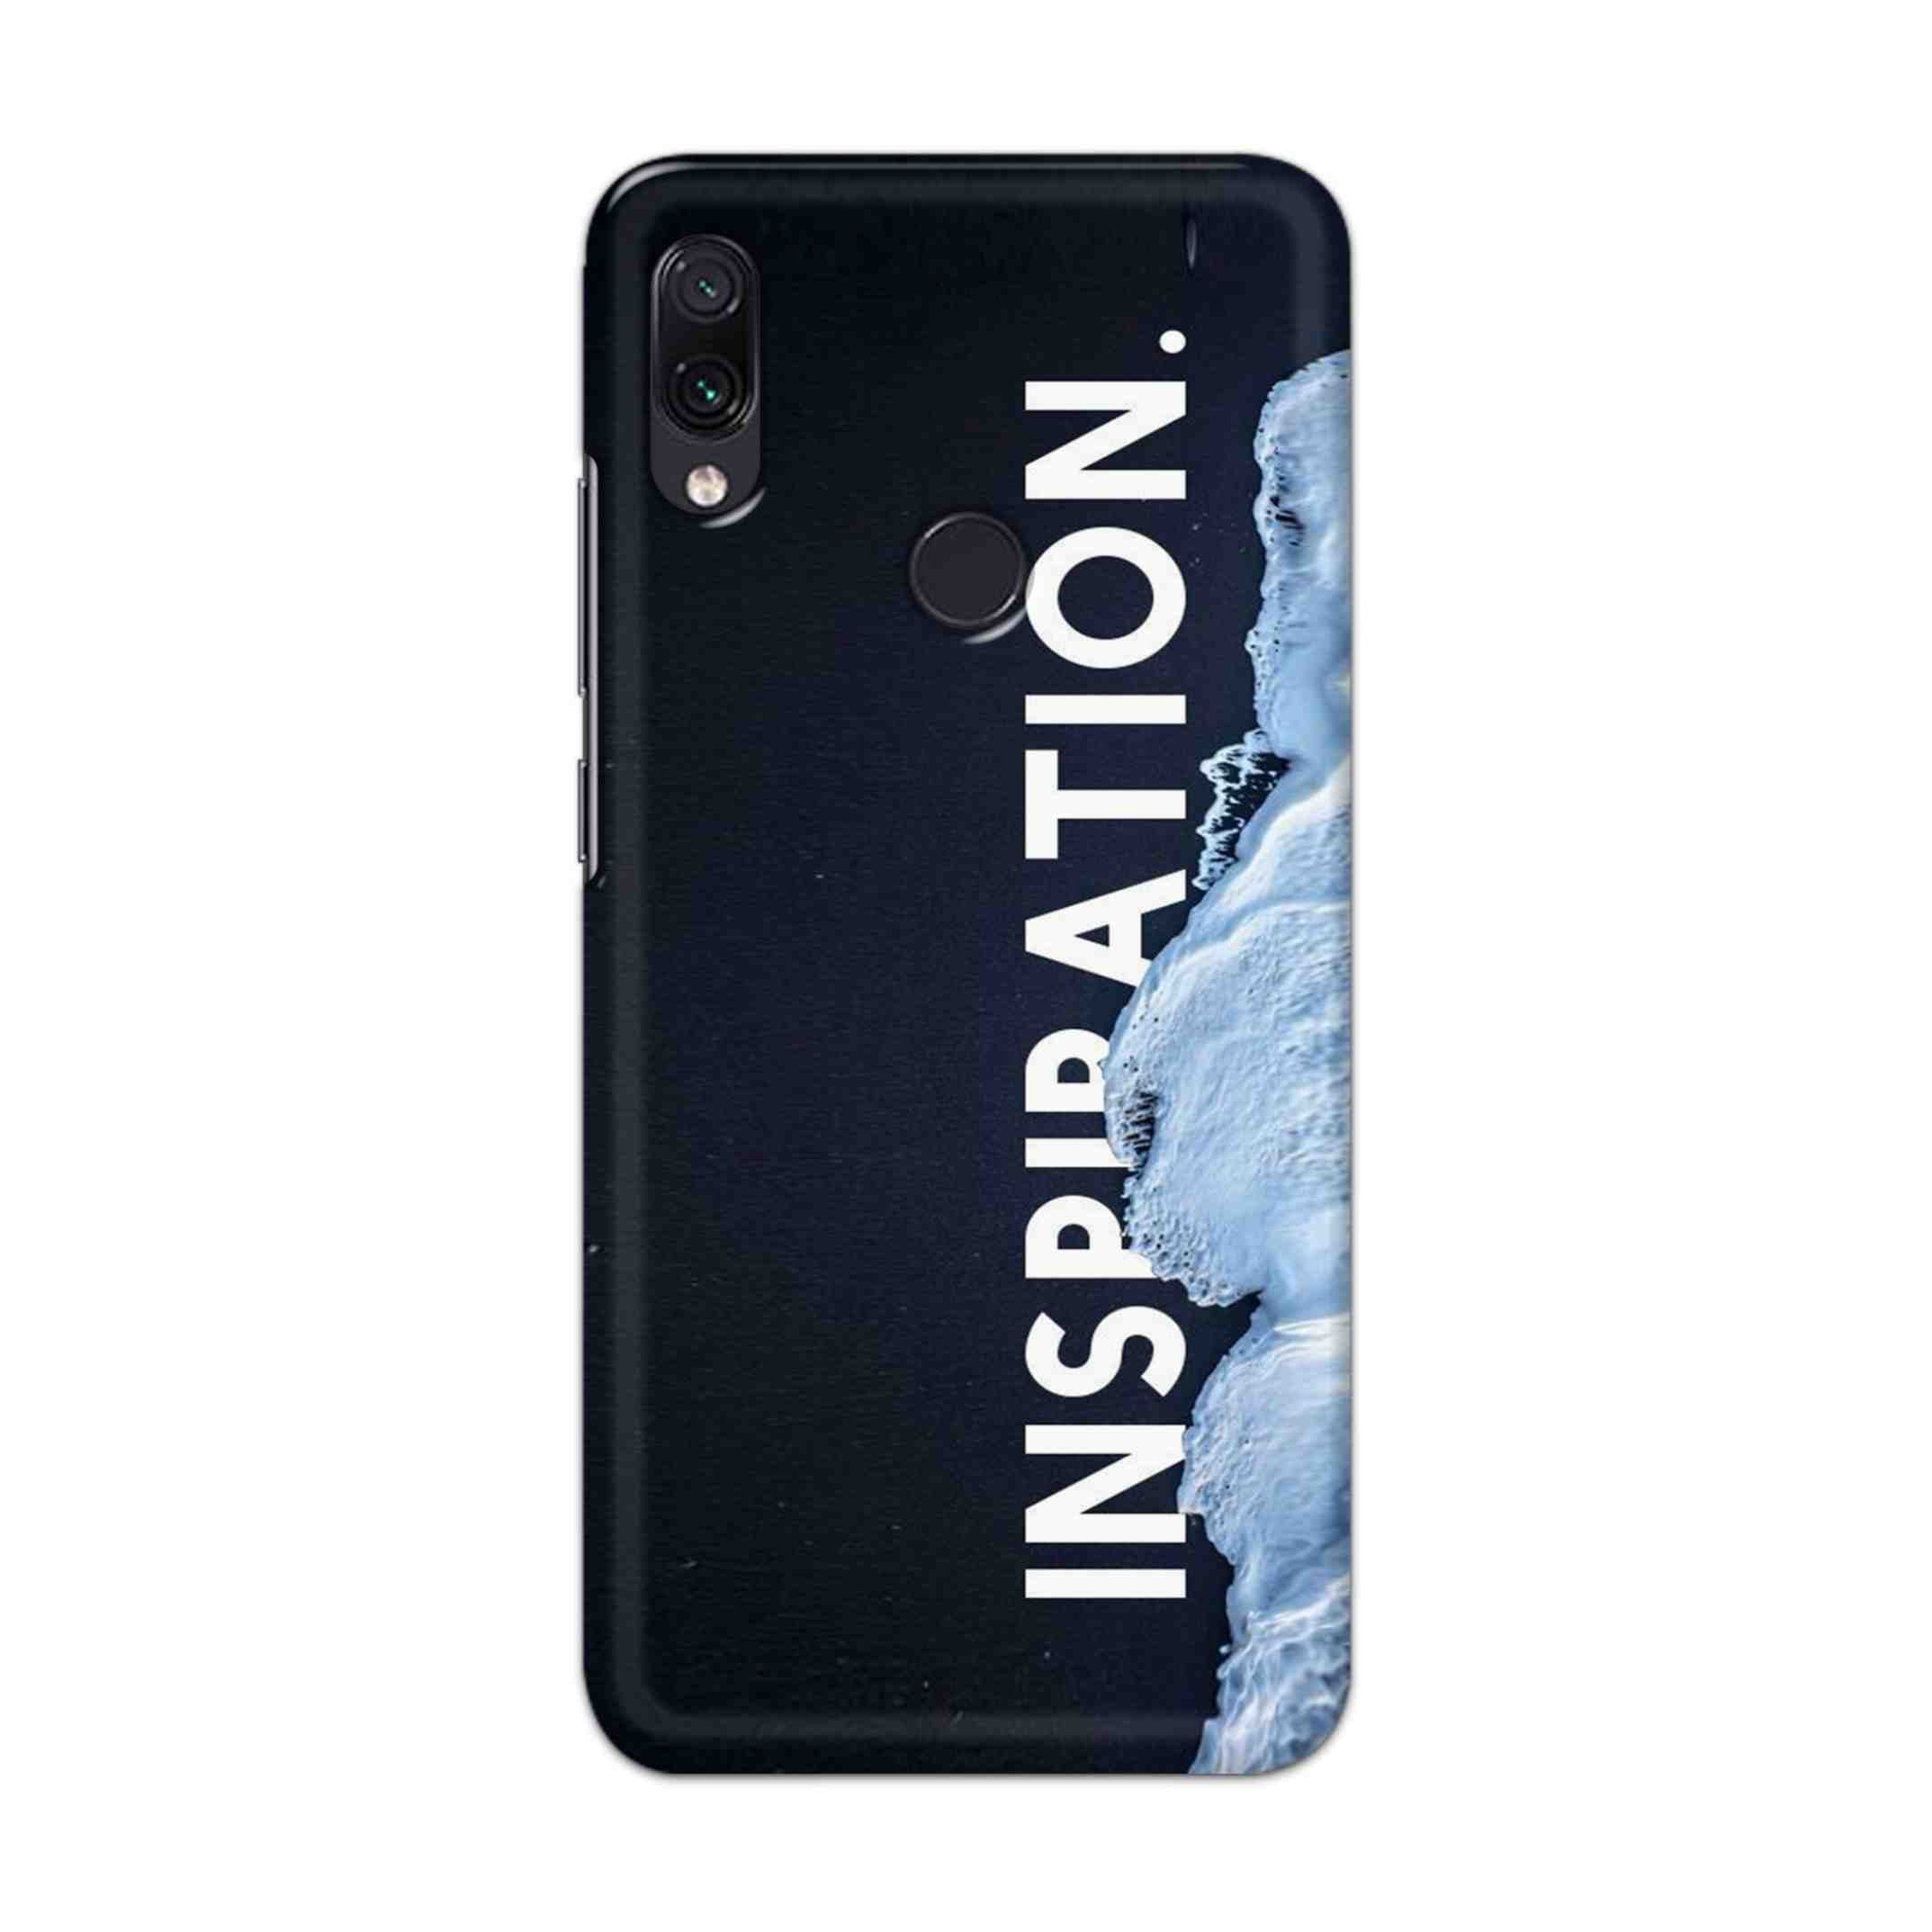 Buy Inspiration Hard Back Mobile Phone Case Cover For Redmi Note 7 / Note 7 Pro Online